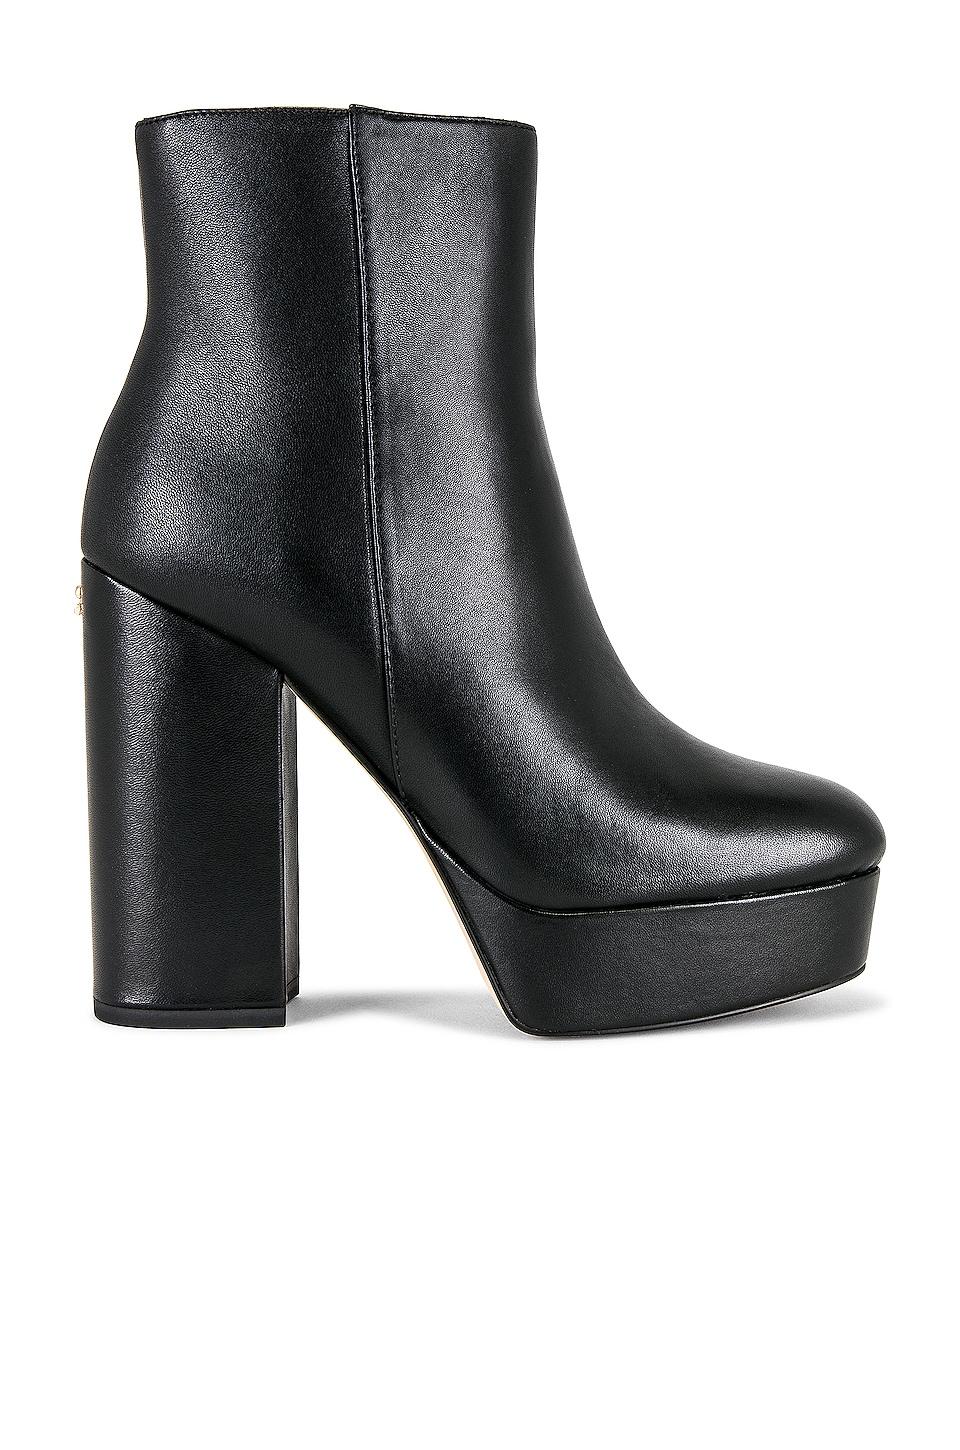 COACH Iona Leather Bootie in Black | Lyst